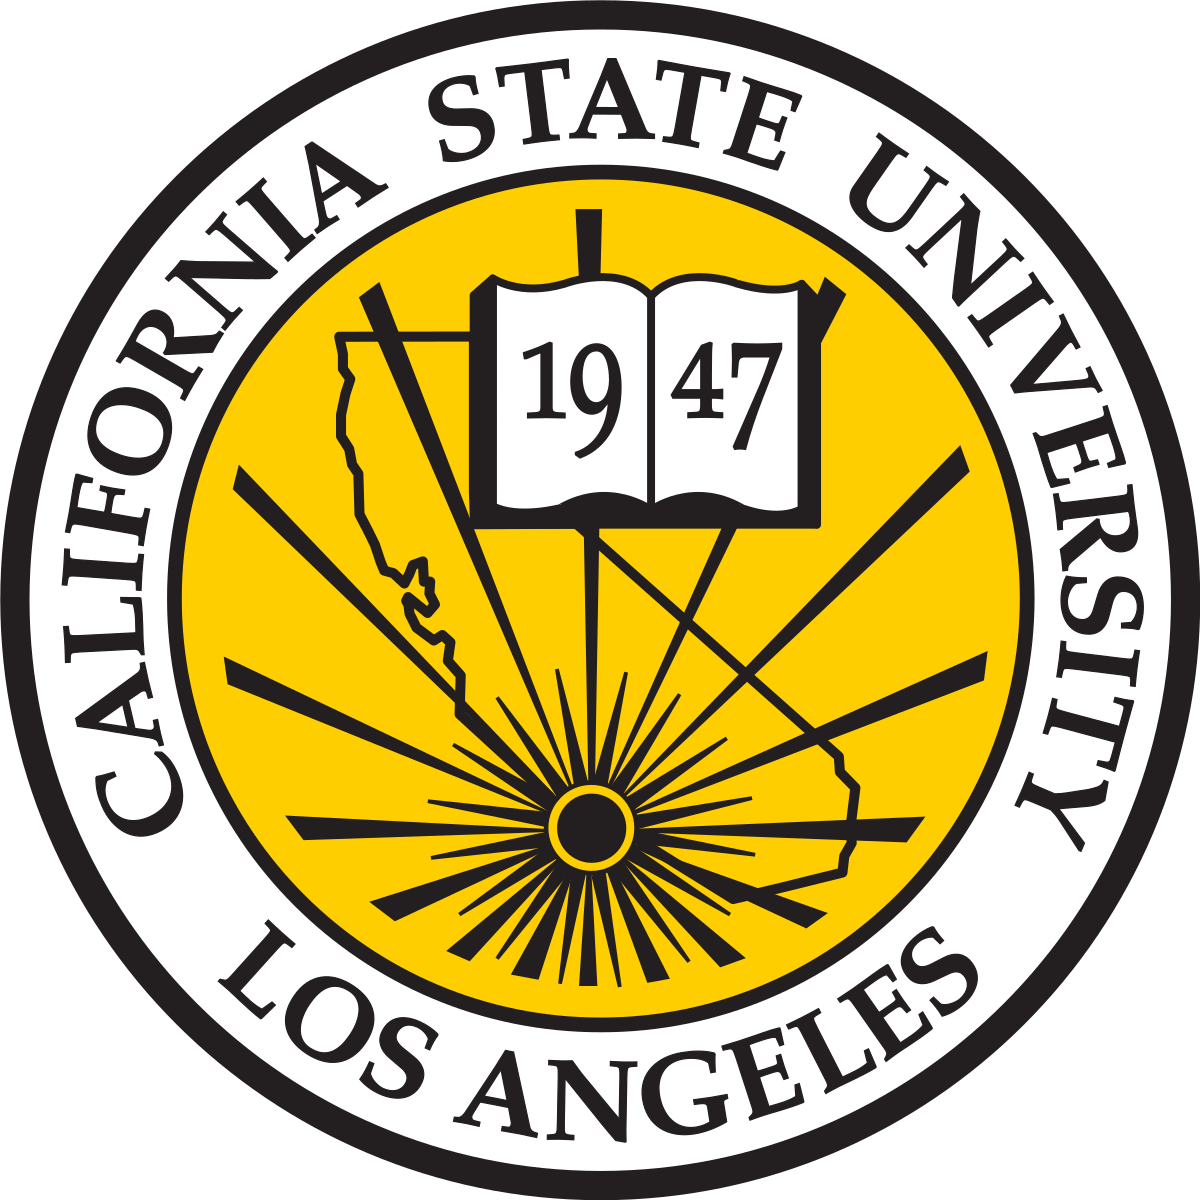 Image result for cal state university los angeles images